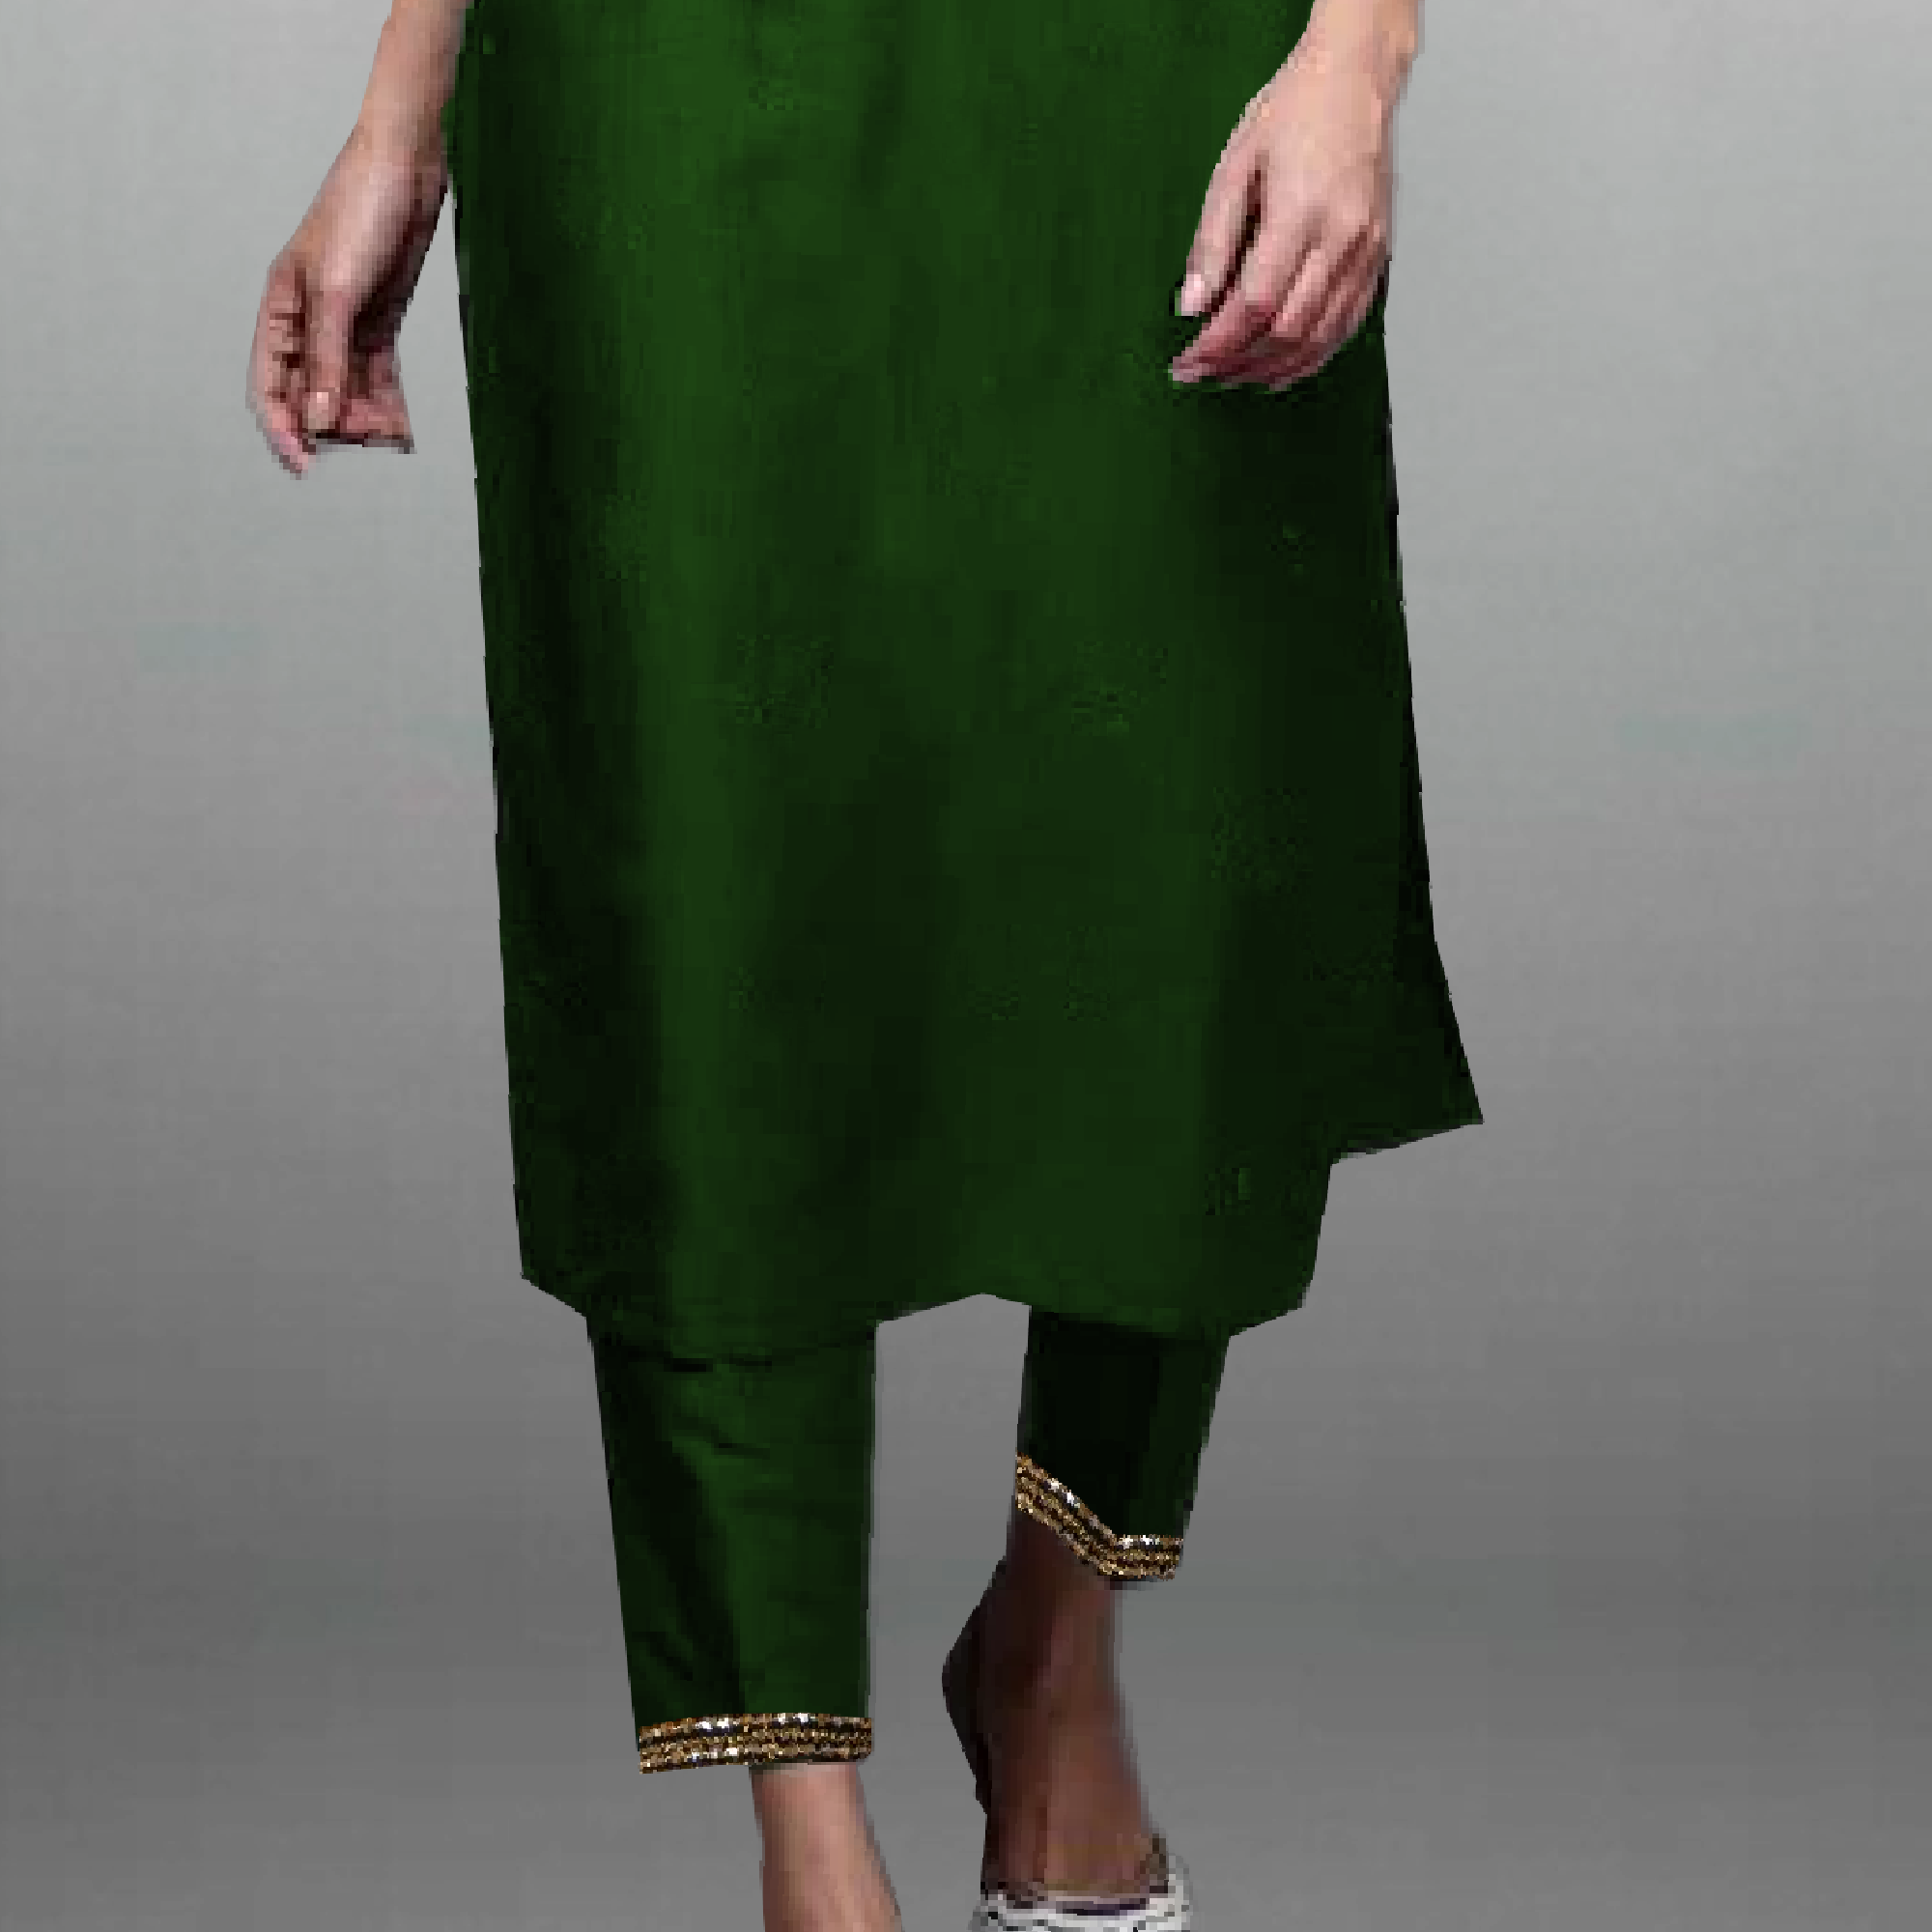 Women's Green neck line embroidered Kurti with Pant-RWKS067